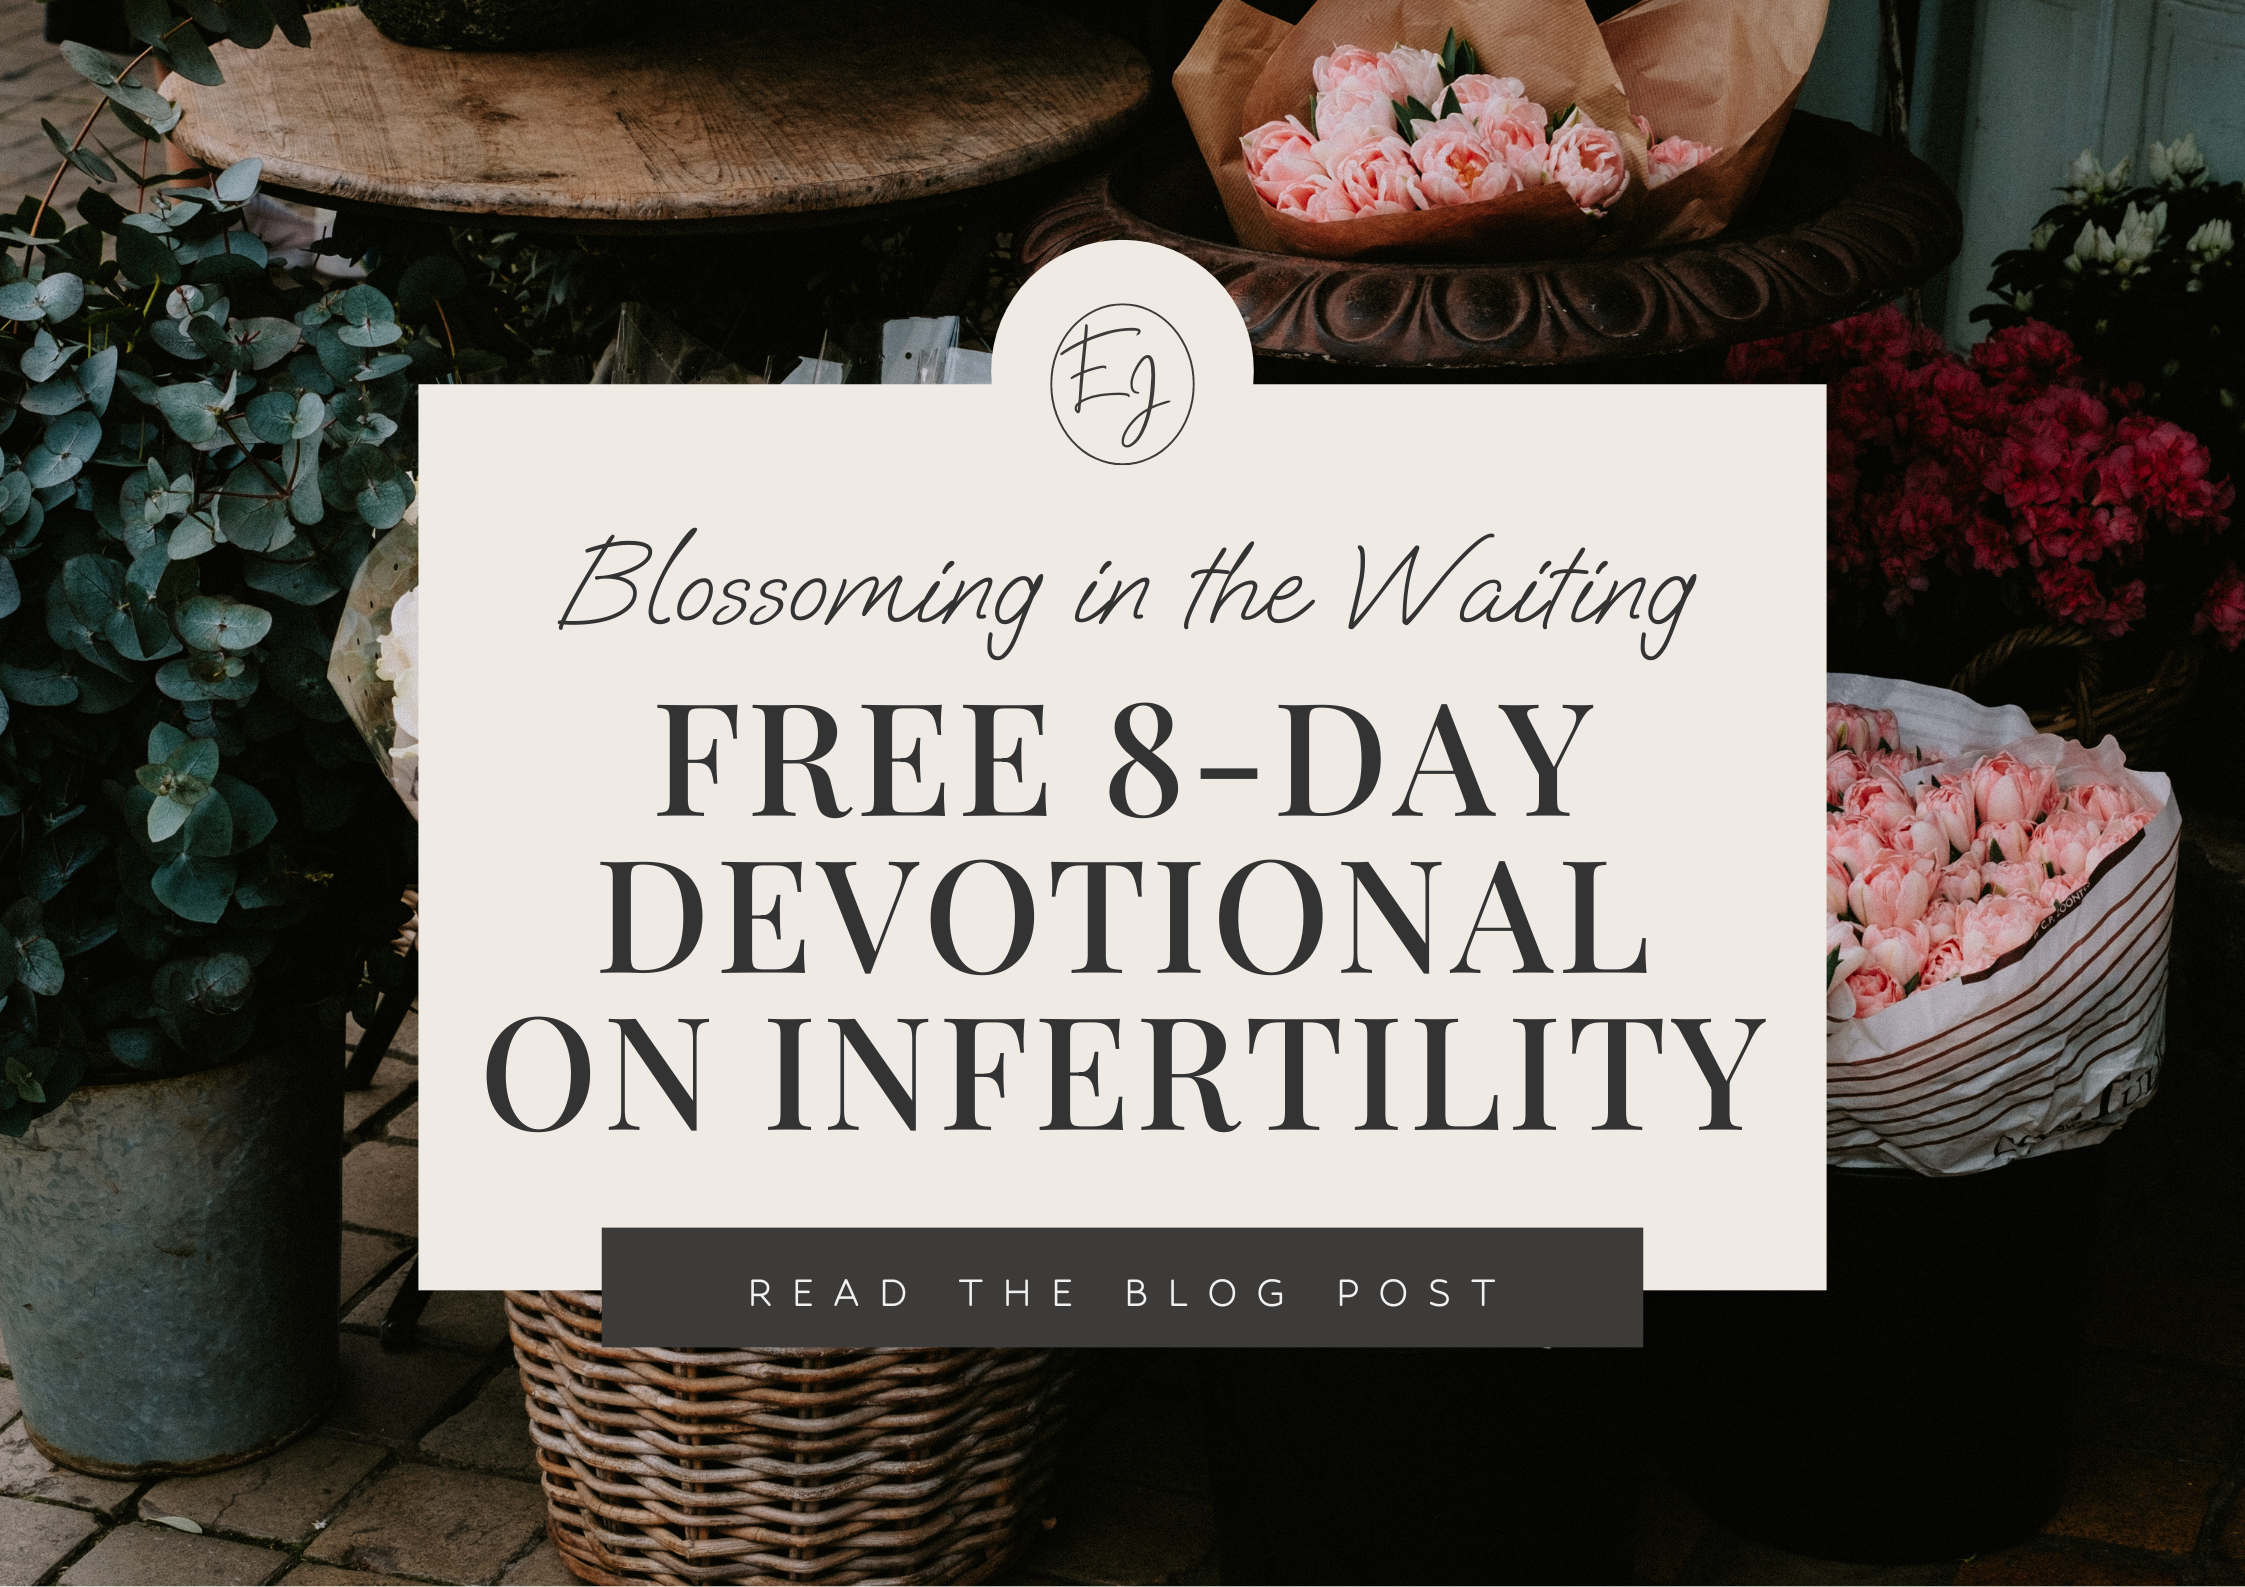 Blossoming in the Waiting: Free 8-Day Devotional on Infertility